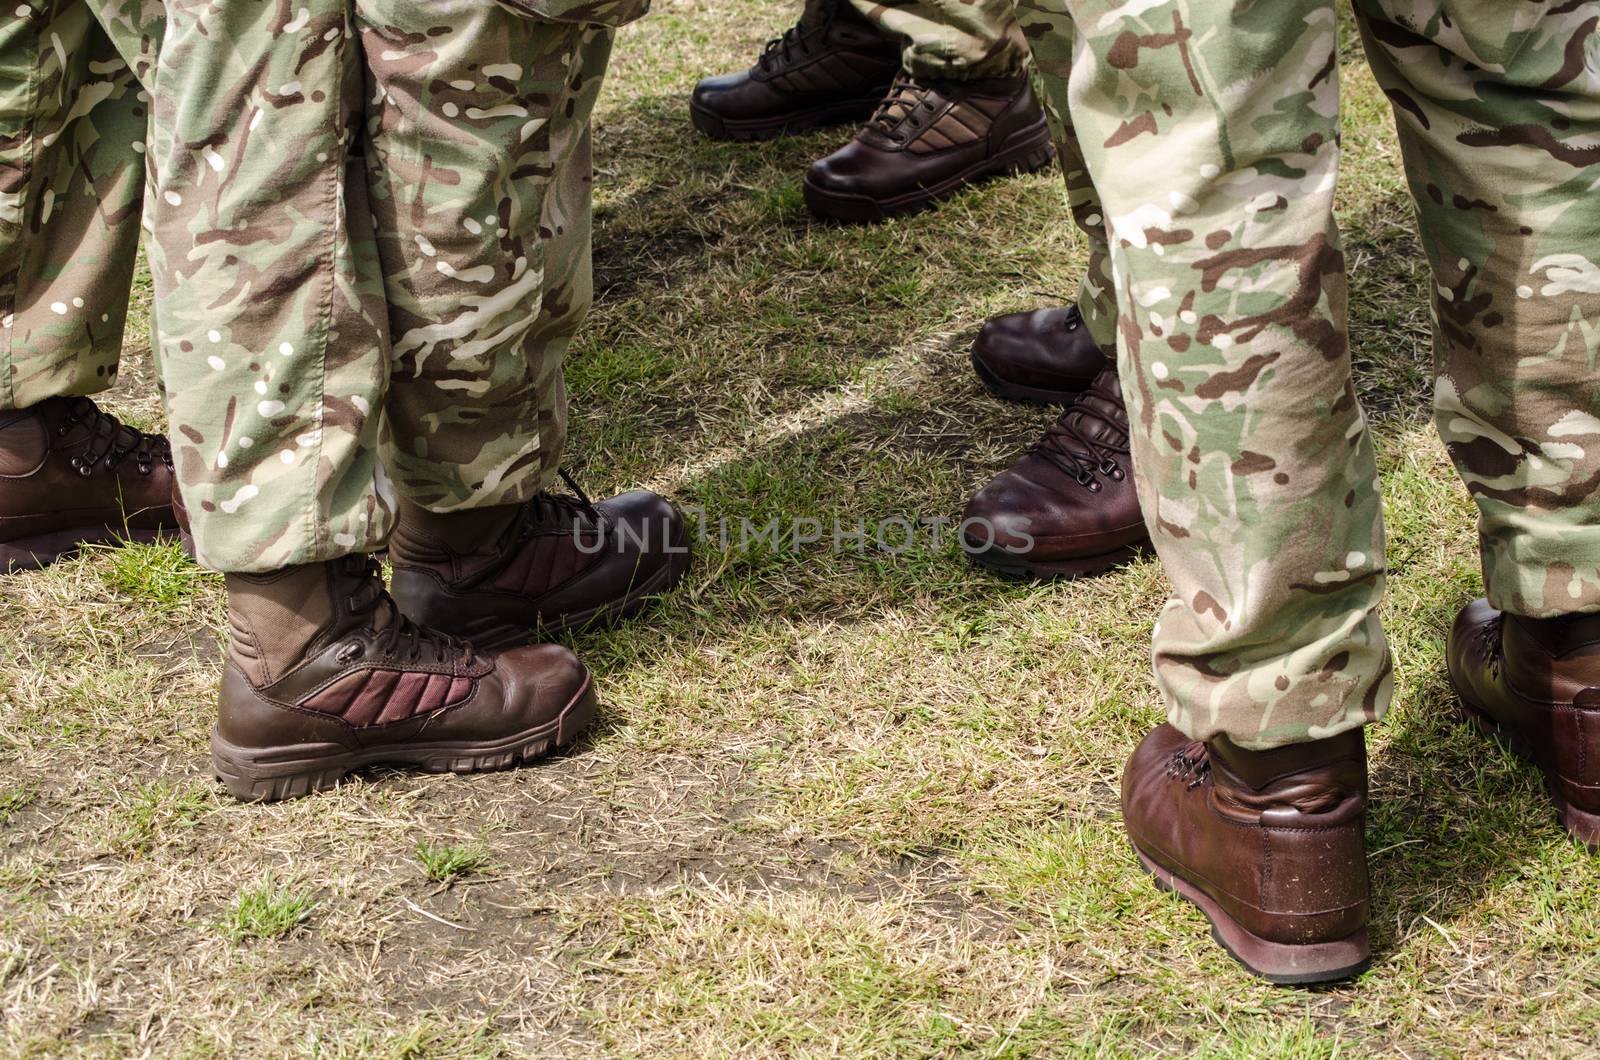 Brown boots worn by British soldiers with their camouflage uniform.